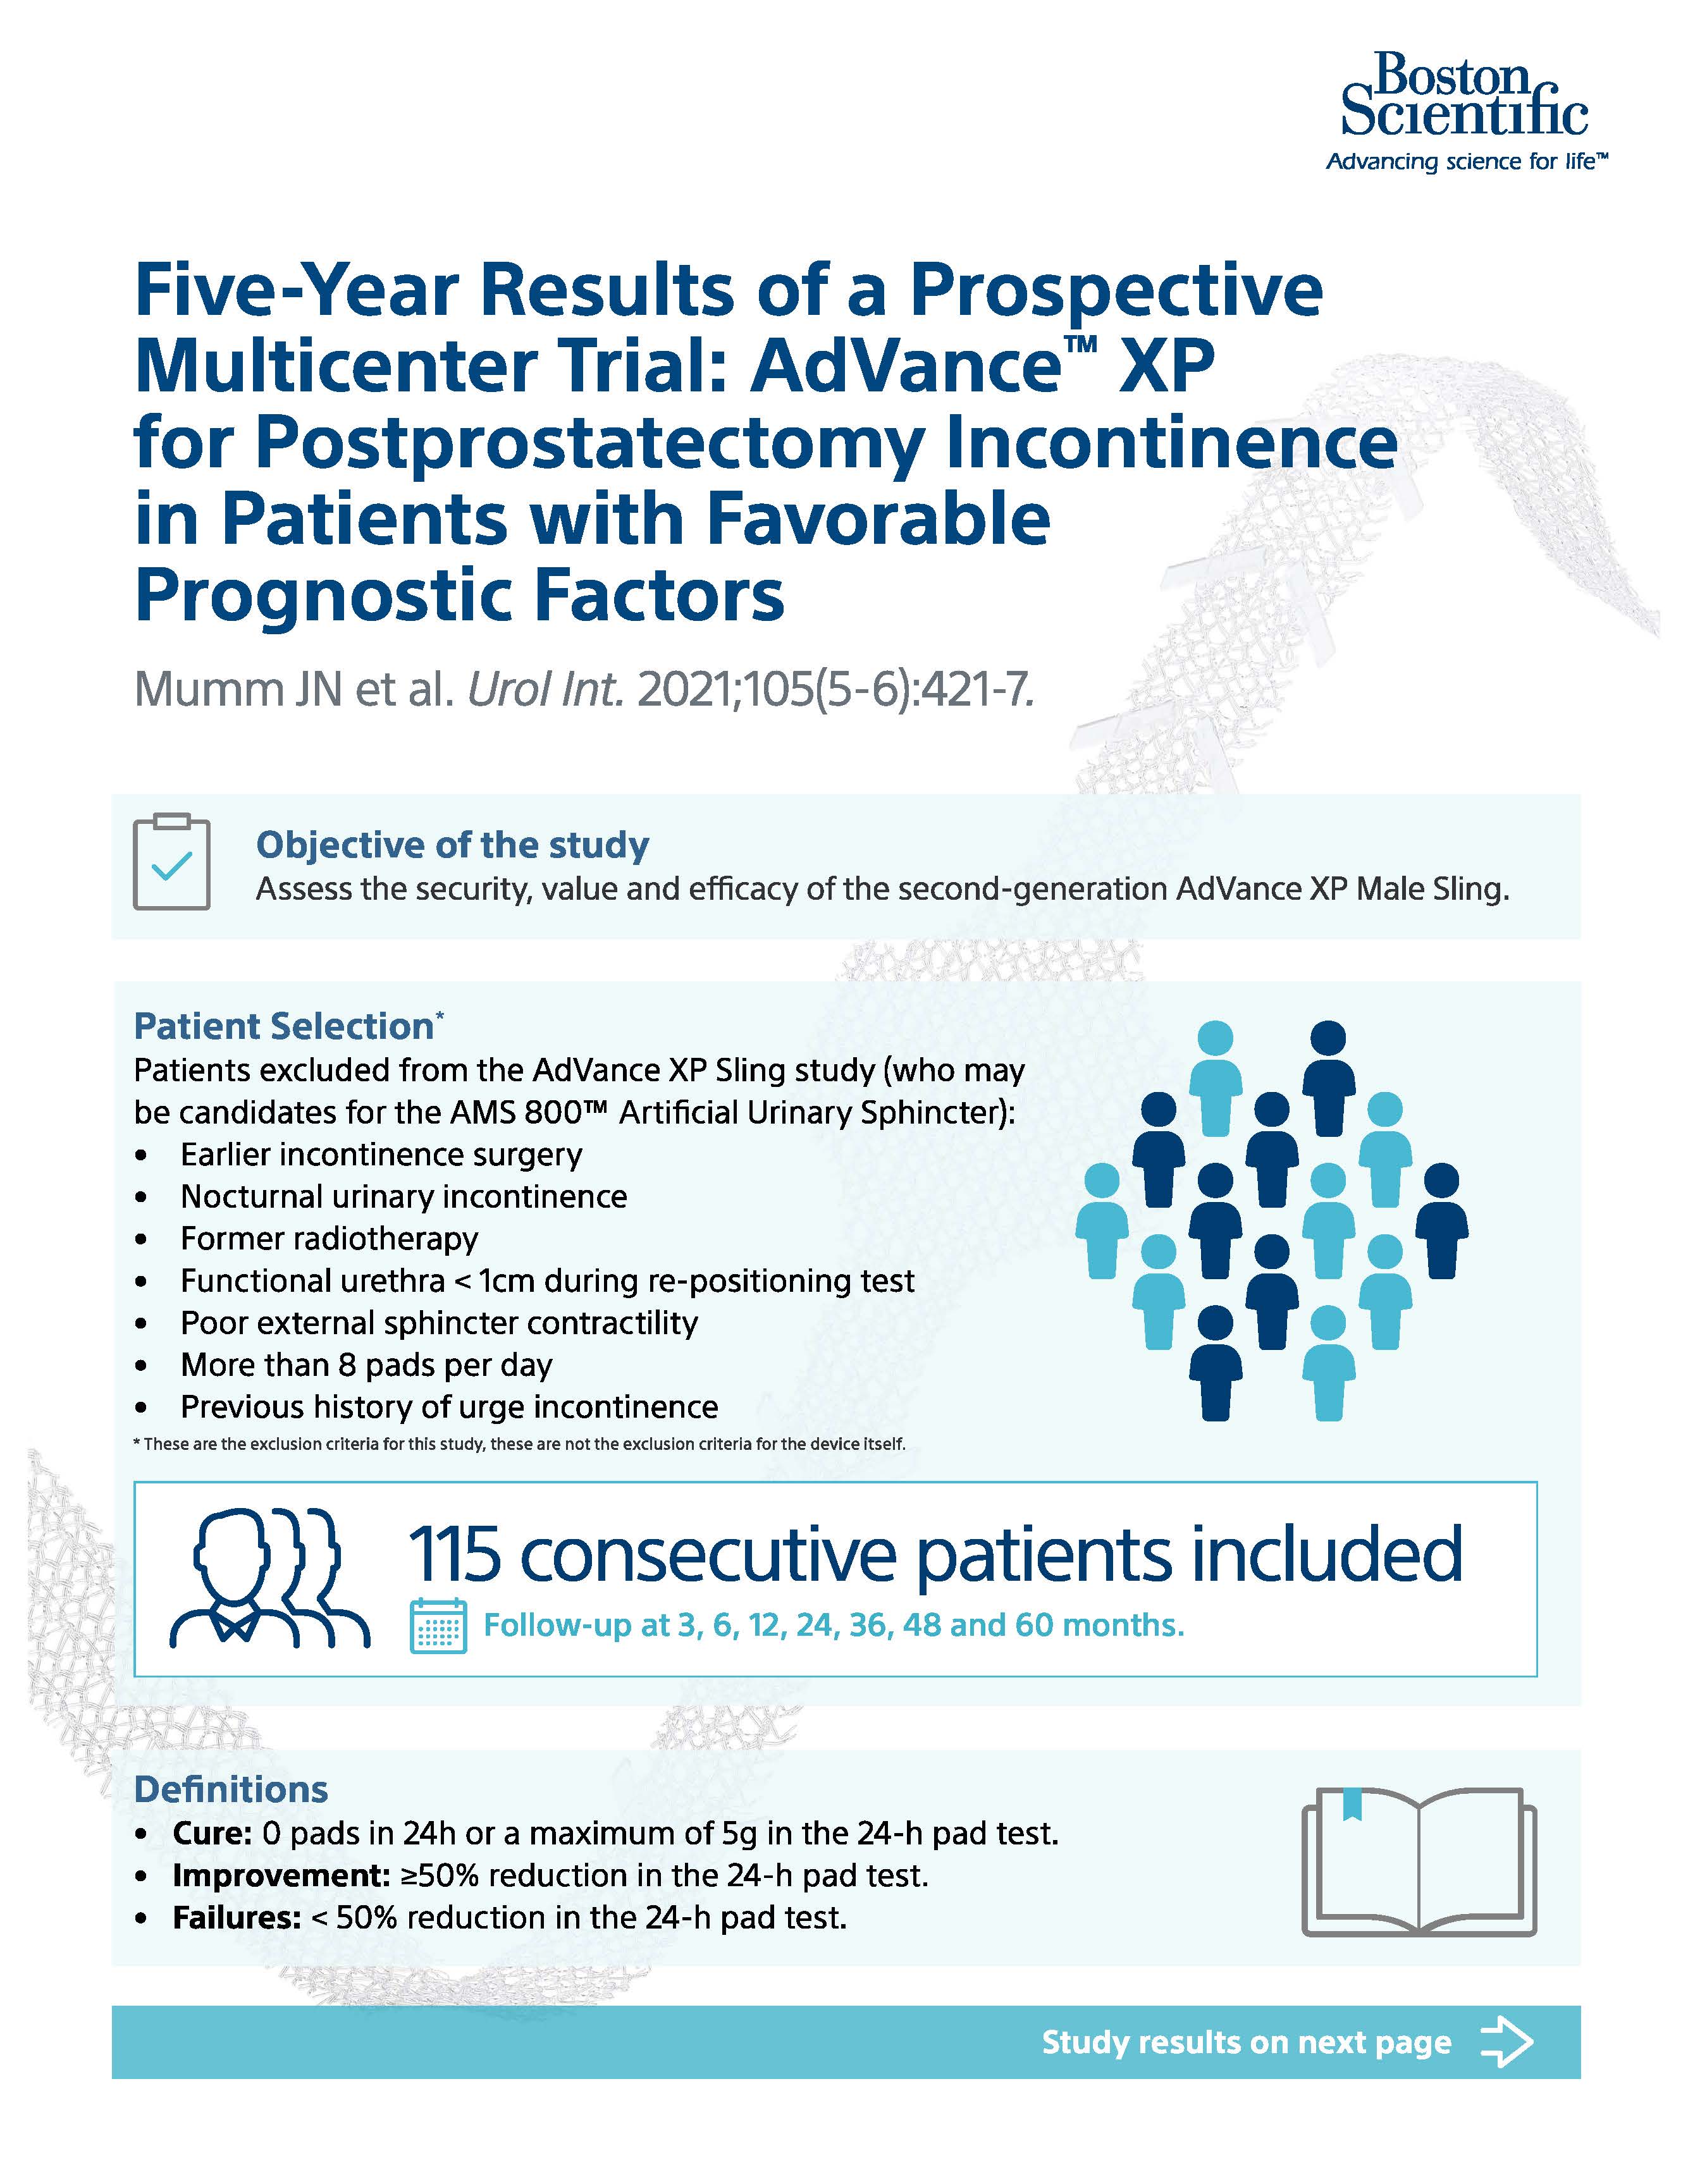 Boston Scientific Summary of  the Five-Year Results of a Prospective Multicenter Trial